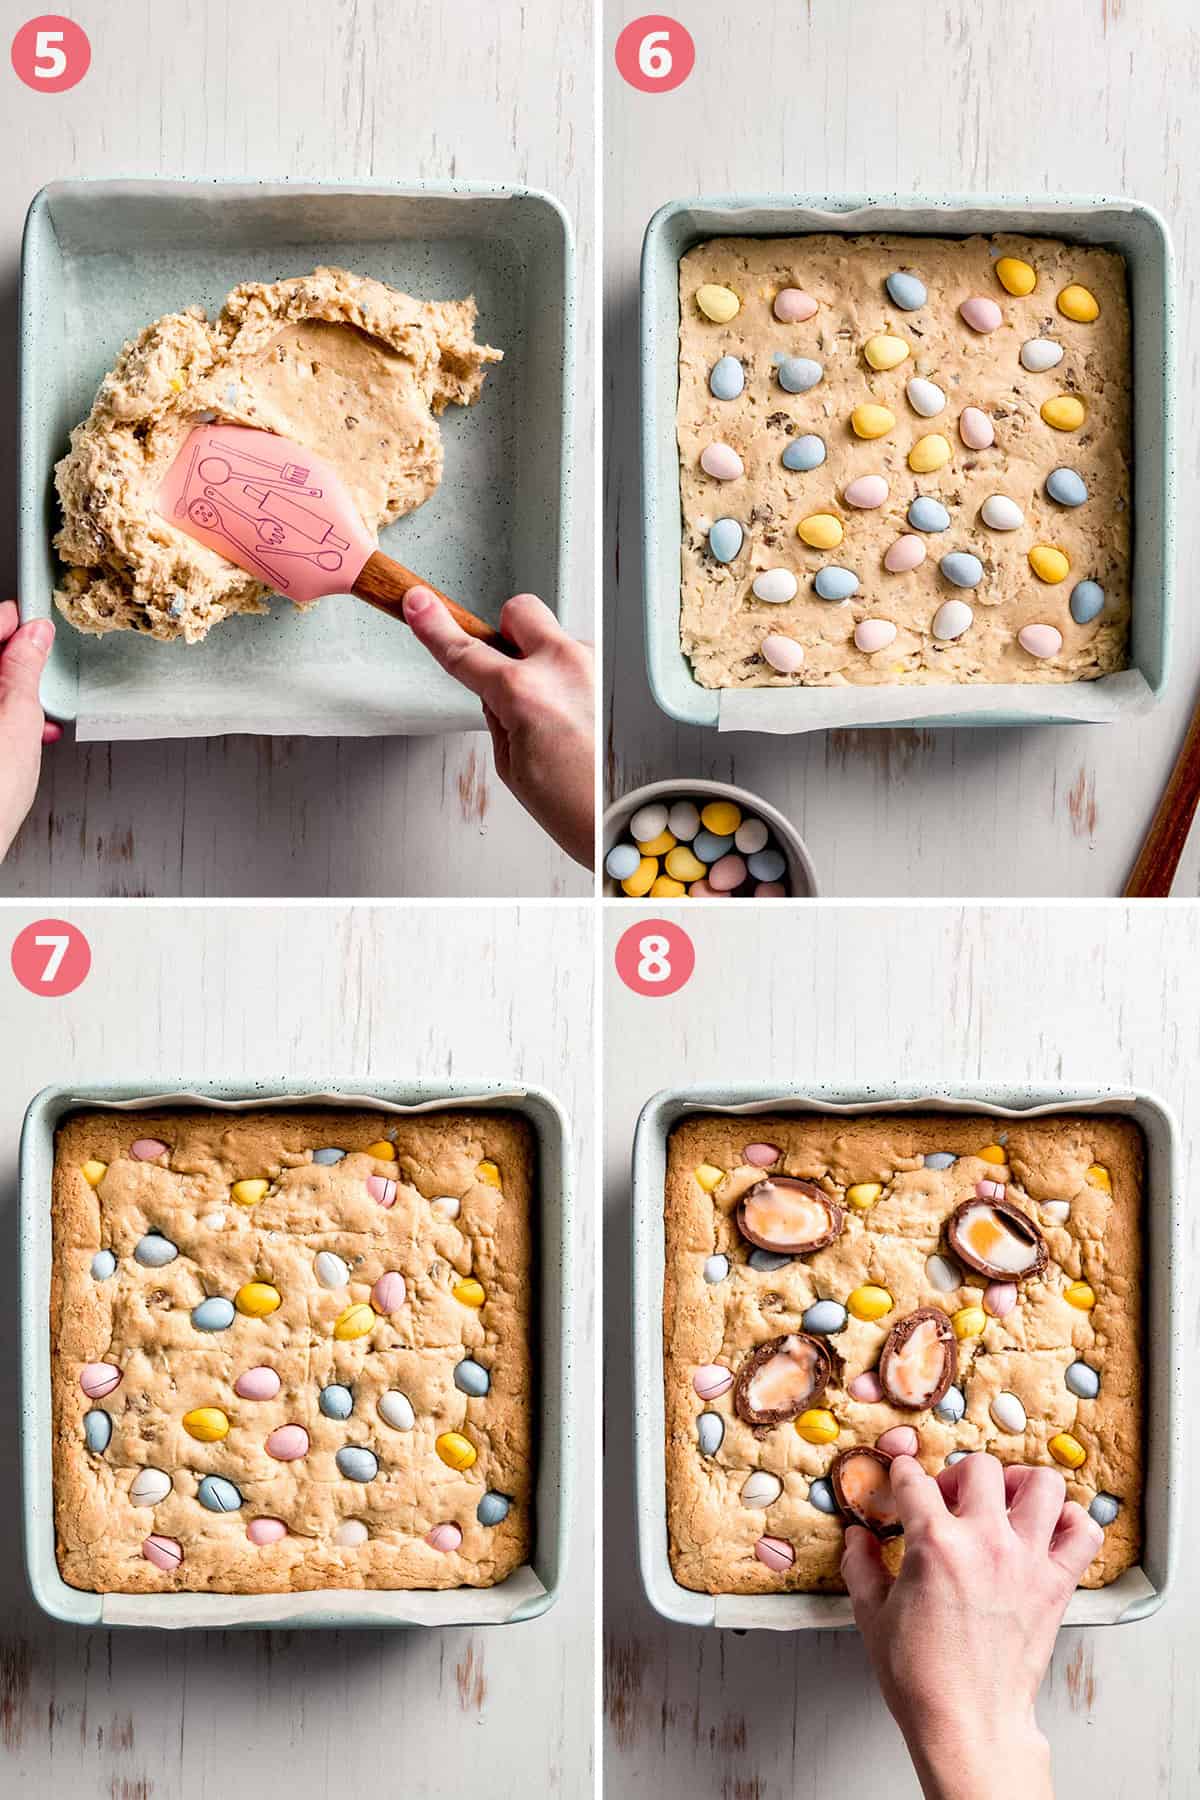 Spreading the cookie dough into a square pan and topping with Cadbury eggs.